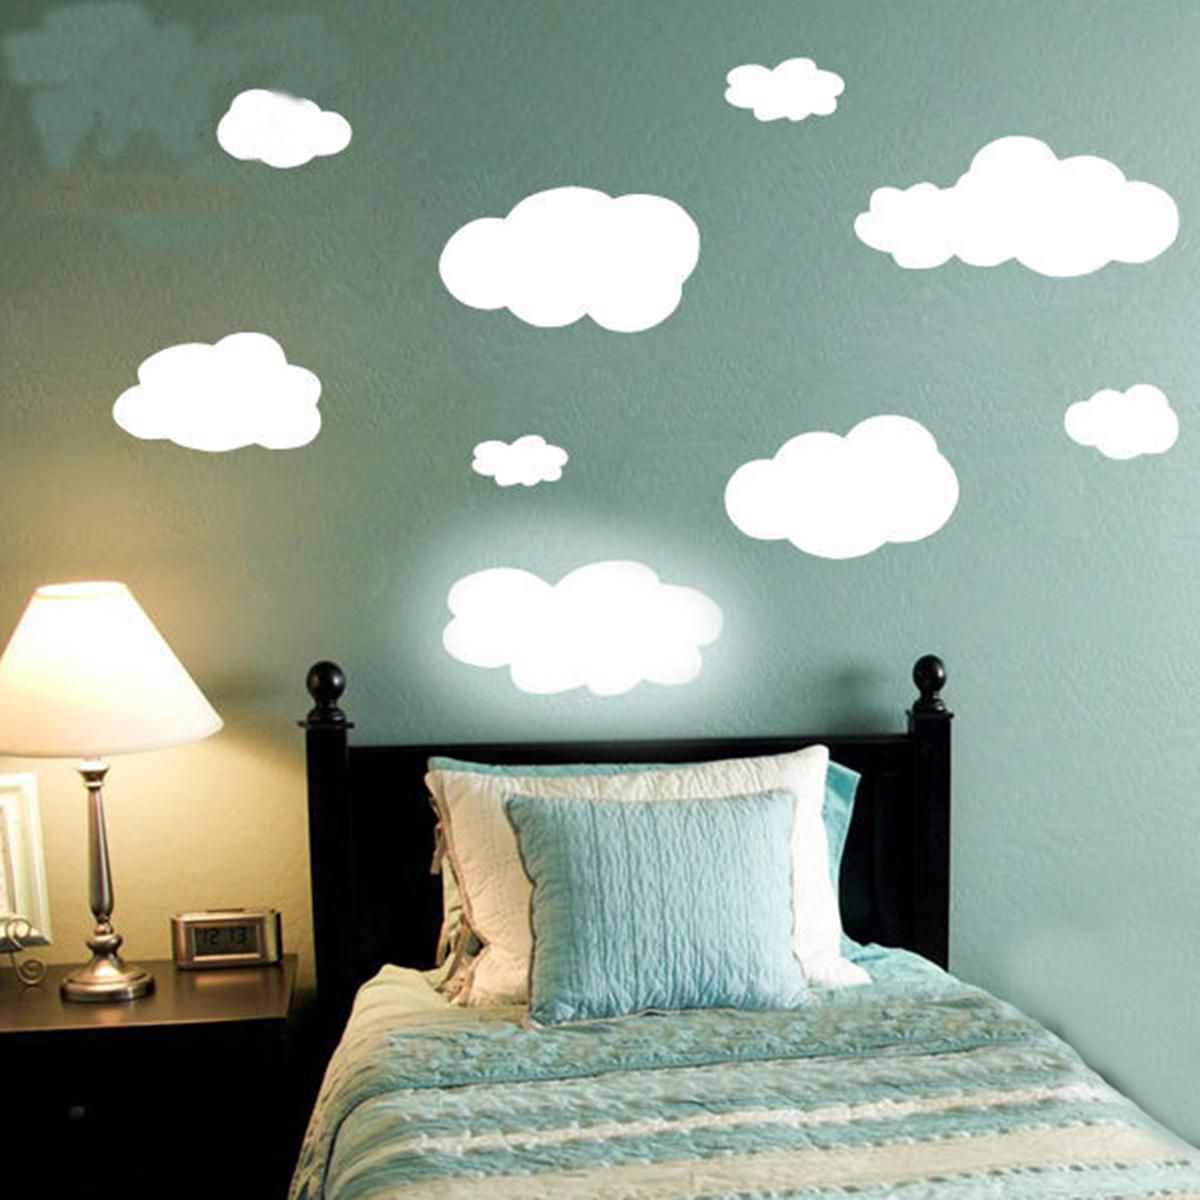 9pcs White Clouds Diy Mural Removable Wall Sticker Art Decal